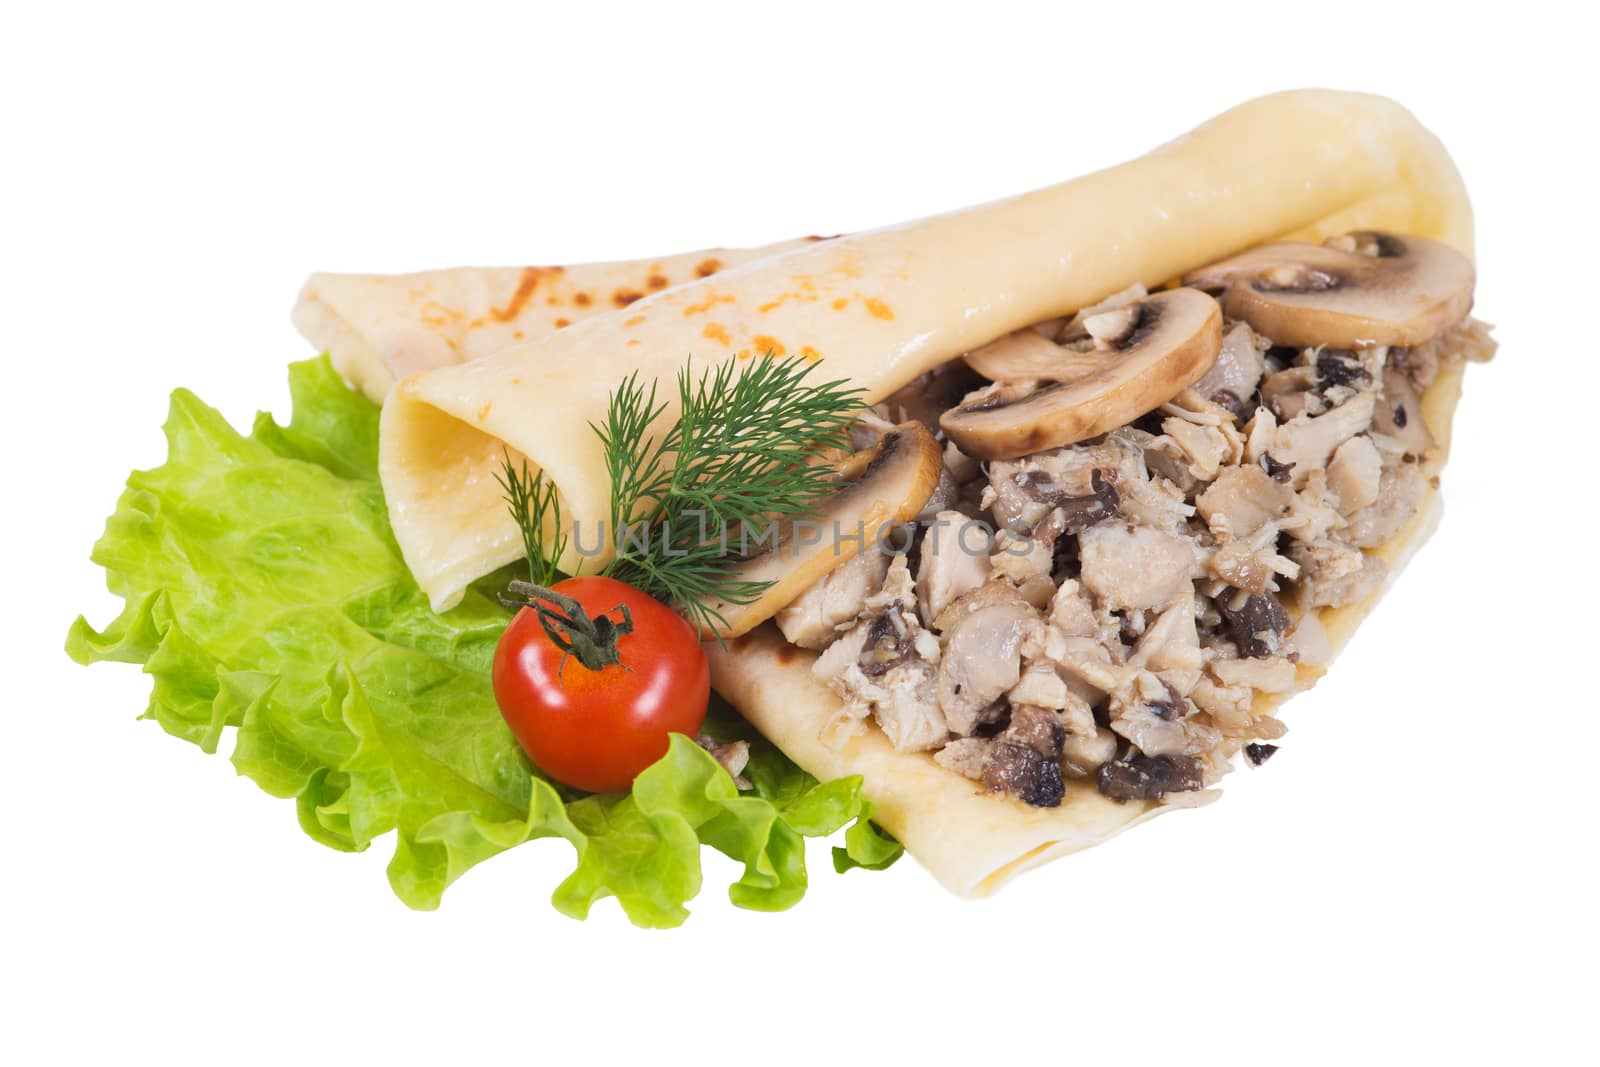 Pancakes with meat and mushrooms on a white background by kzen